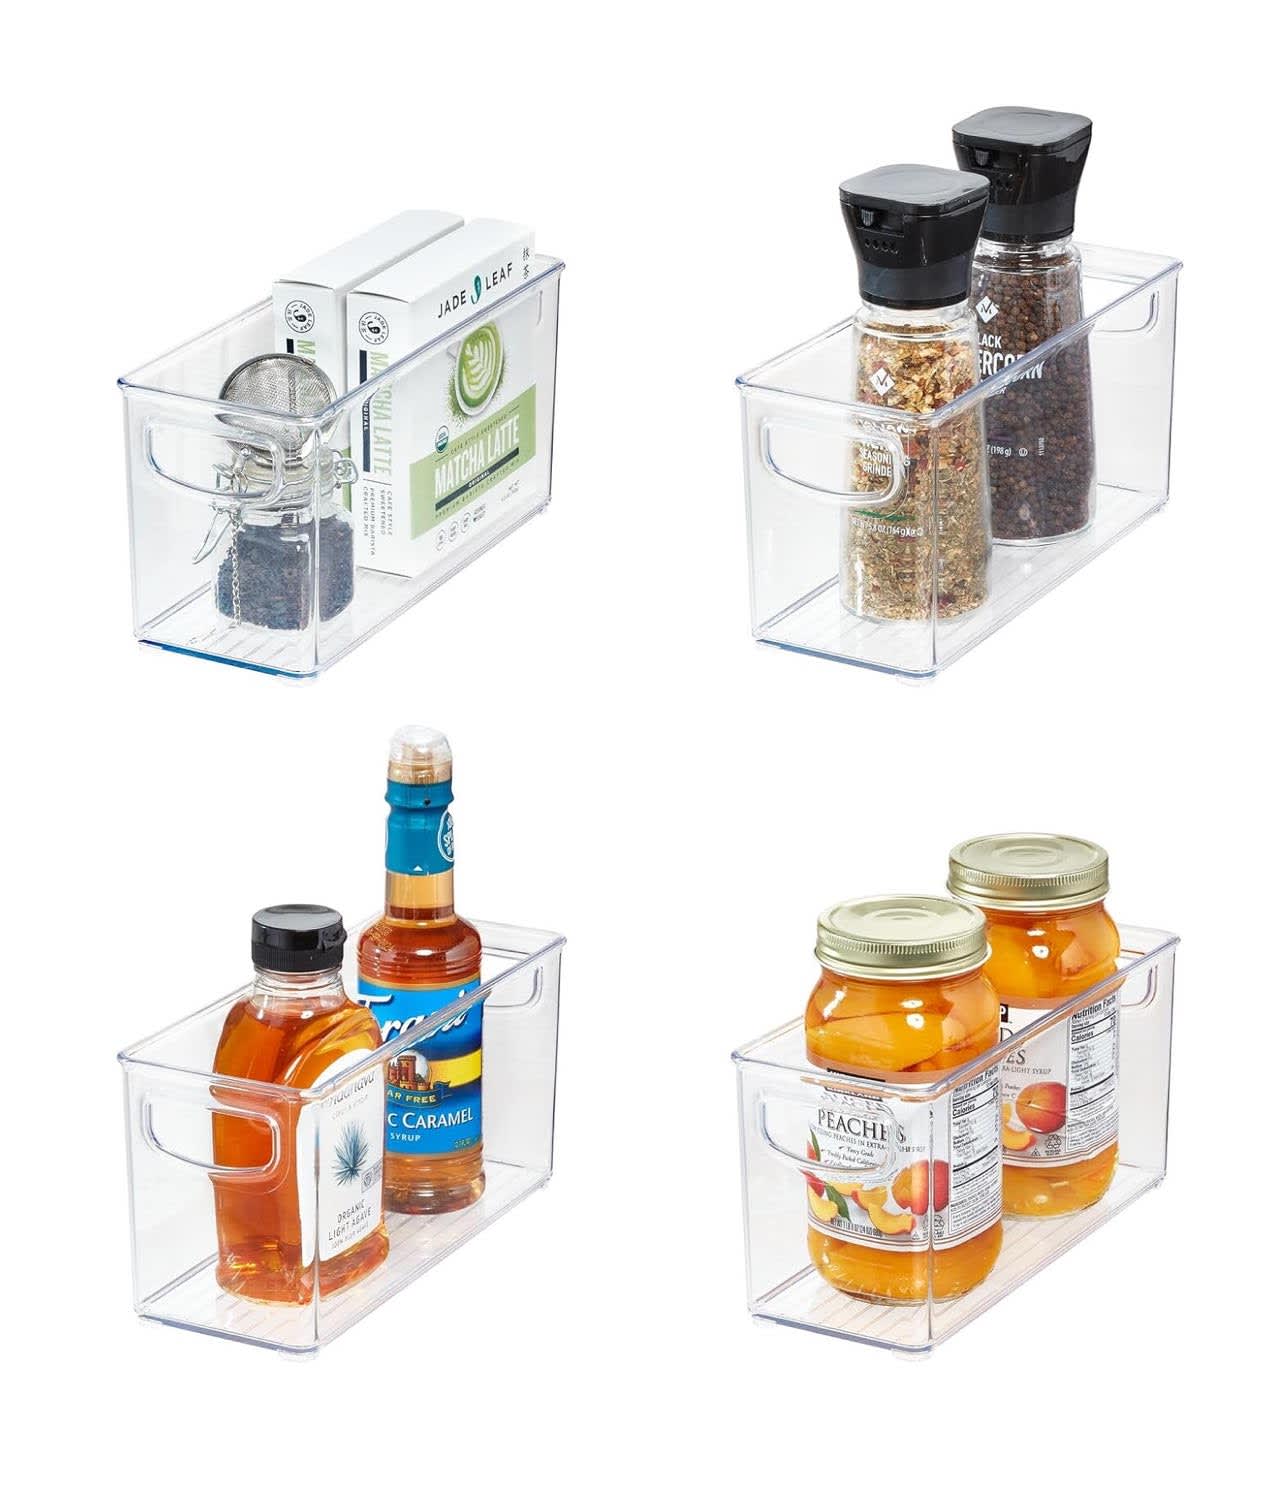 https://cdn.apartmenttherapy.info/image/upload/v1702649880/at/product%20listing/idesign_4-piece_recycled_plastic_small_stackable_kitchen_organizer_bin.jpg